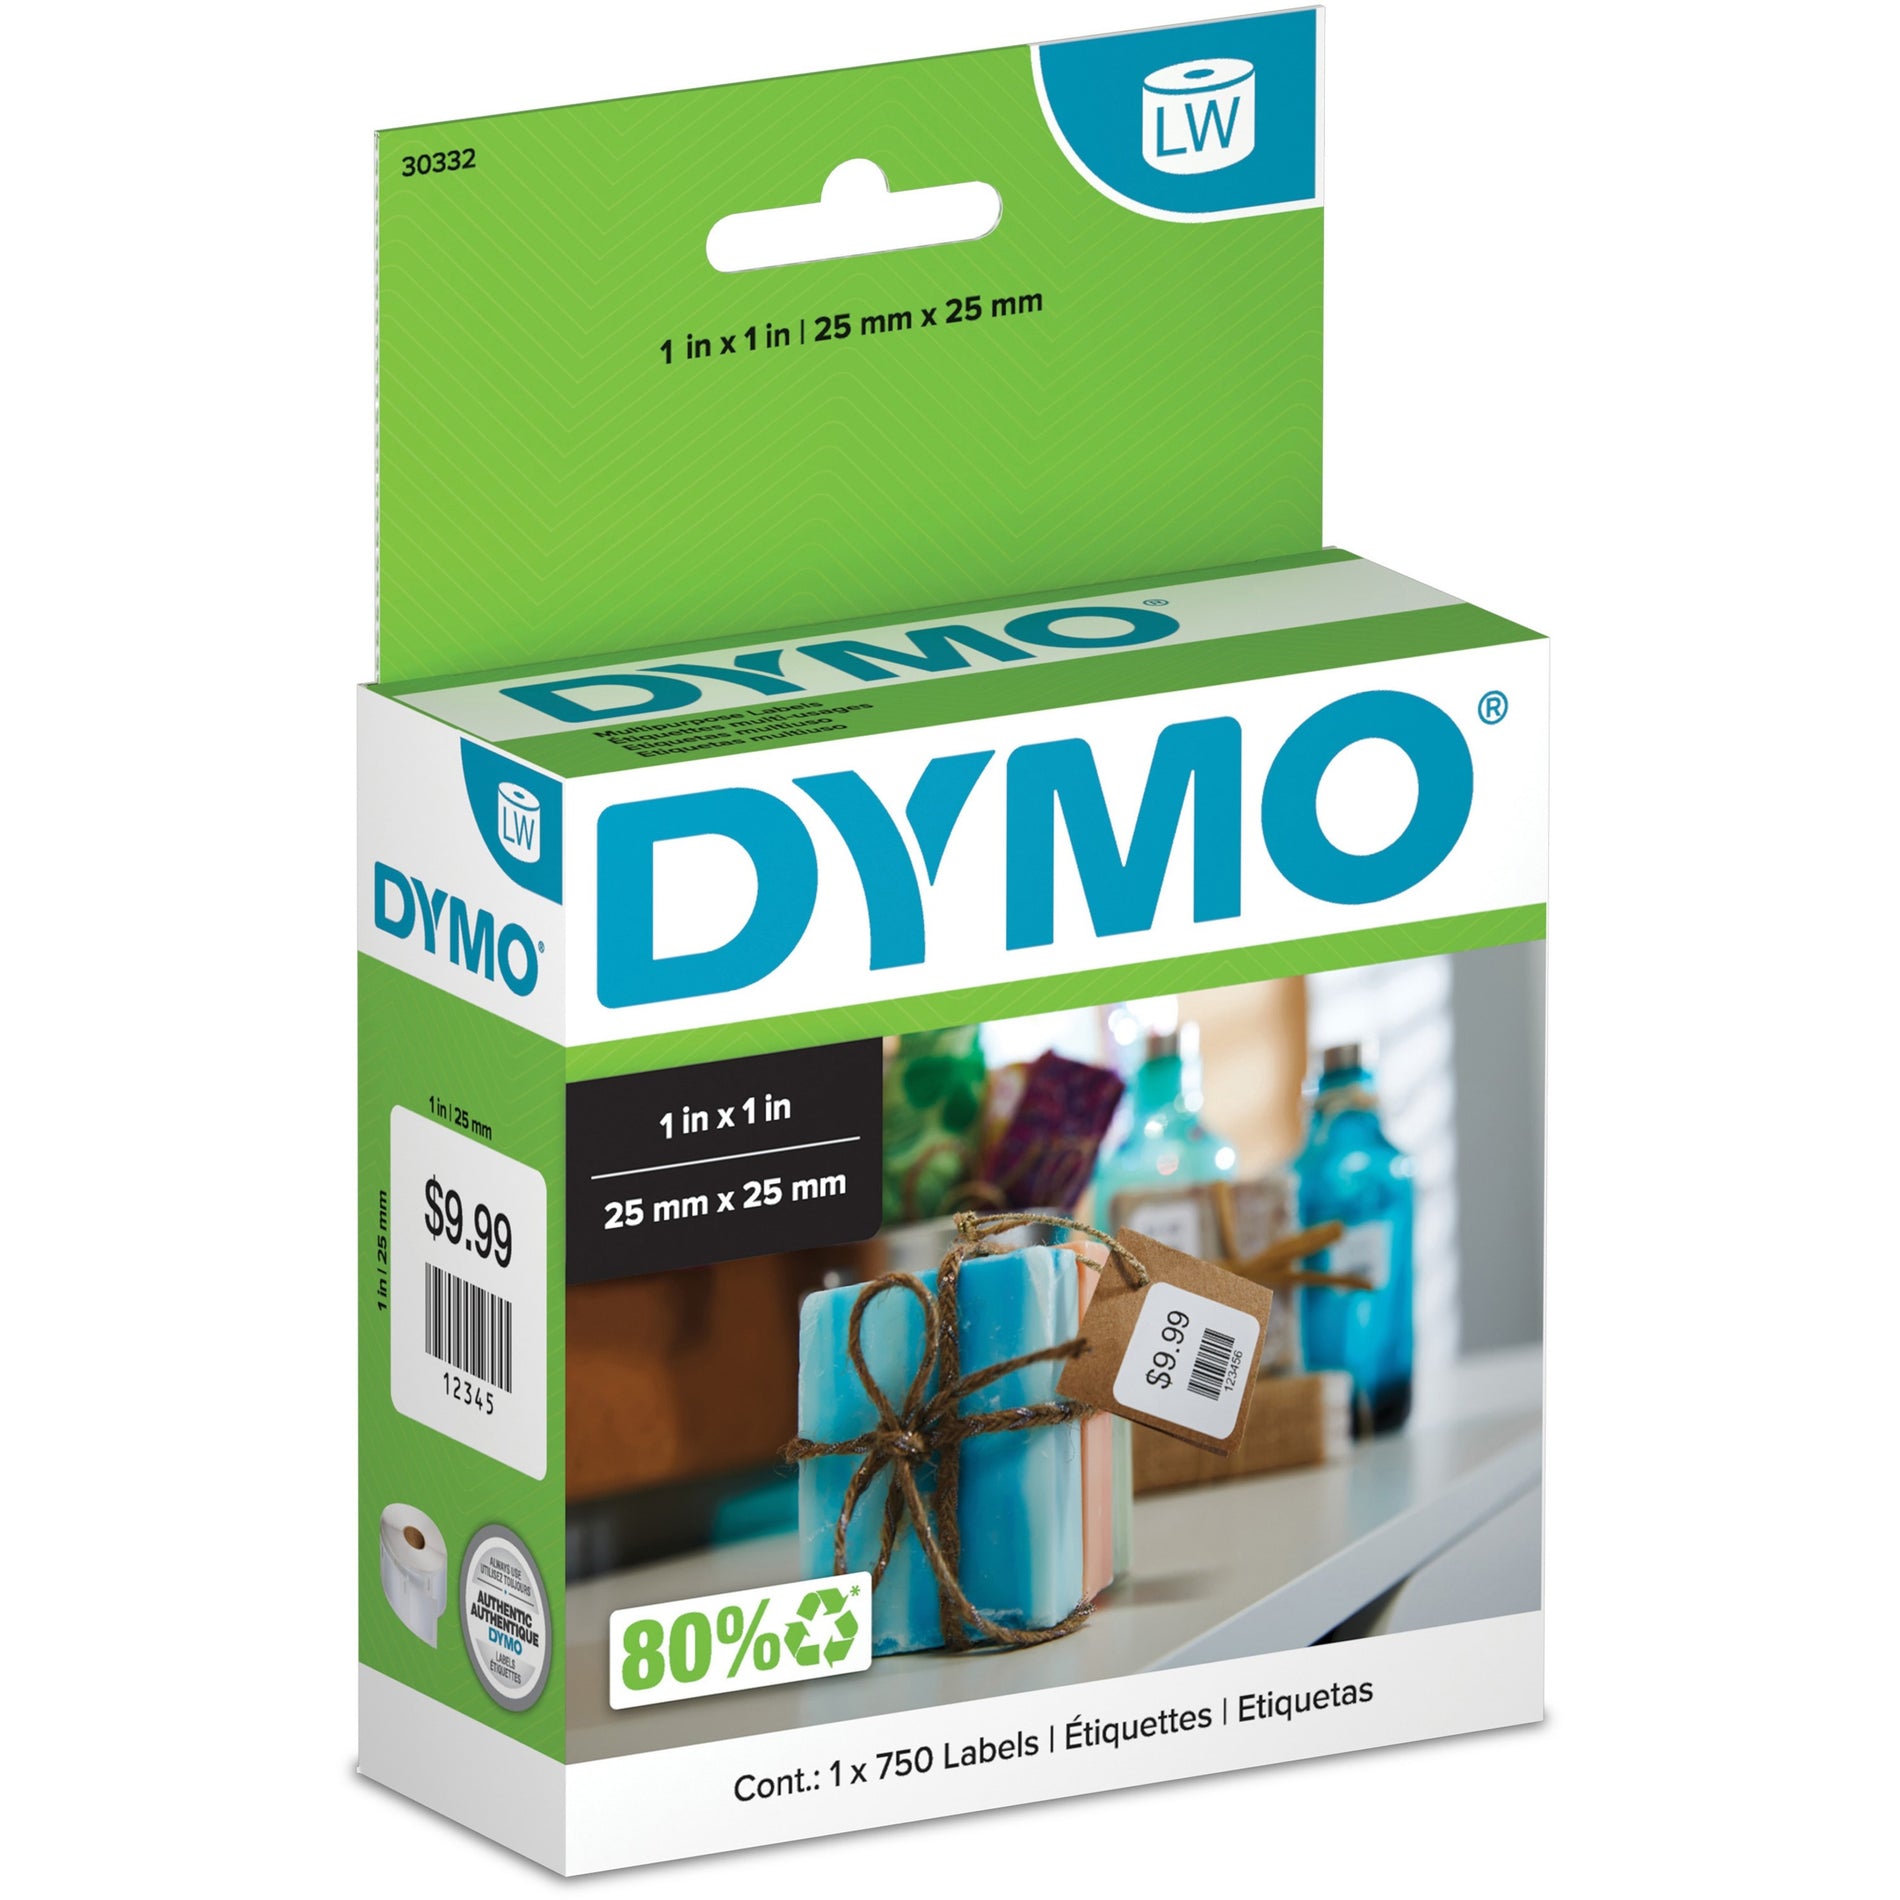 Dymo 30332 LabelWriter Square Multipurpose Labels White, 1" x 1", 750 Labels per Roll